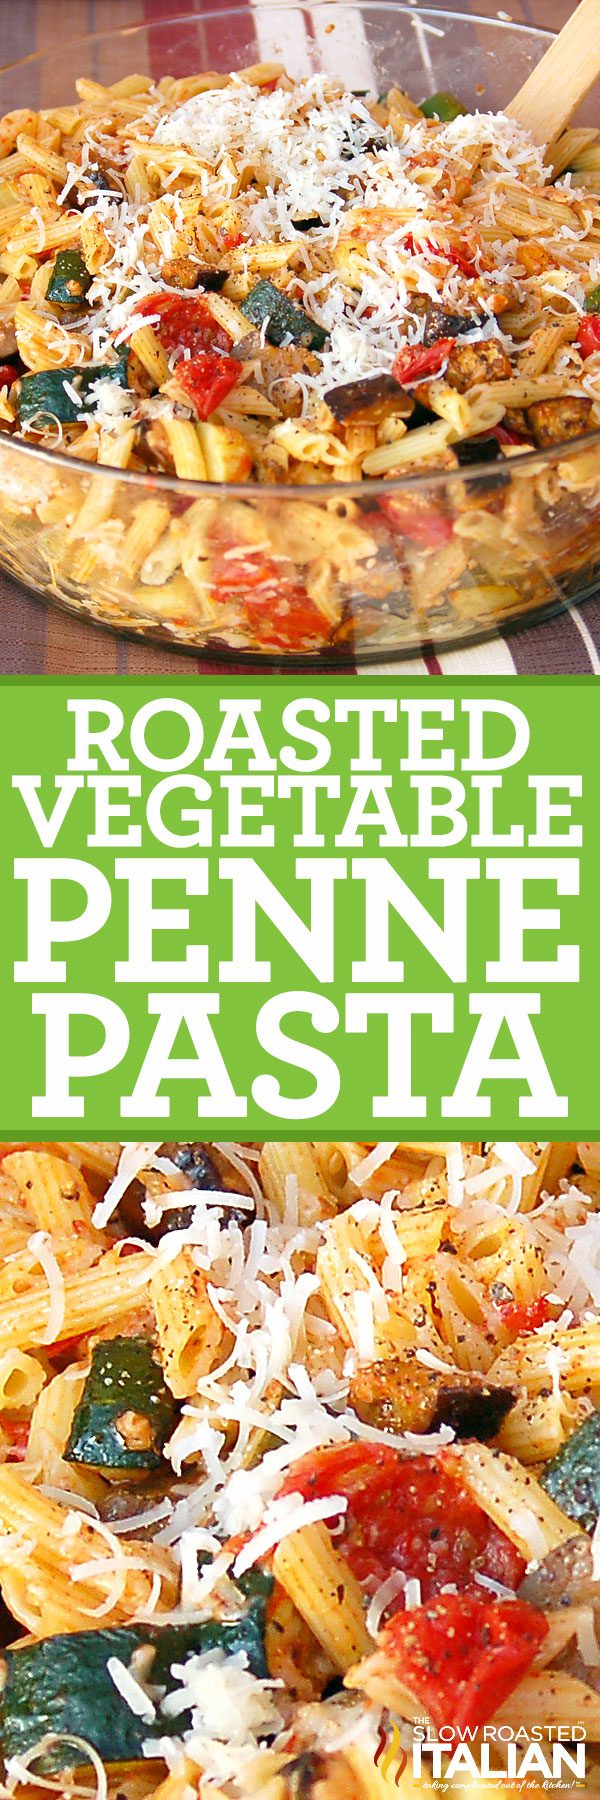 roasted-vegetable-penne-pasta-pin-1993953